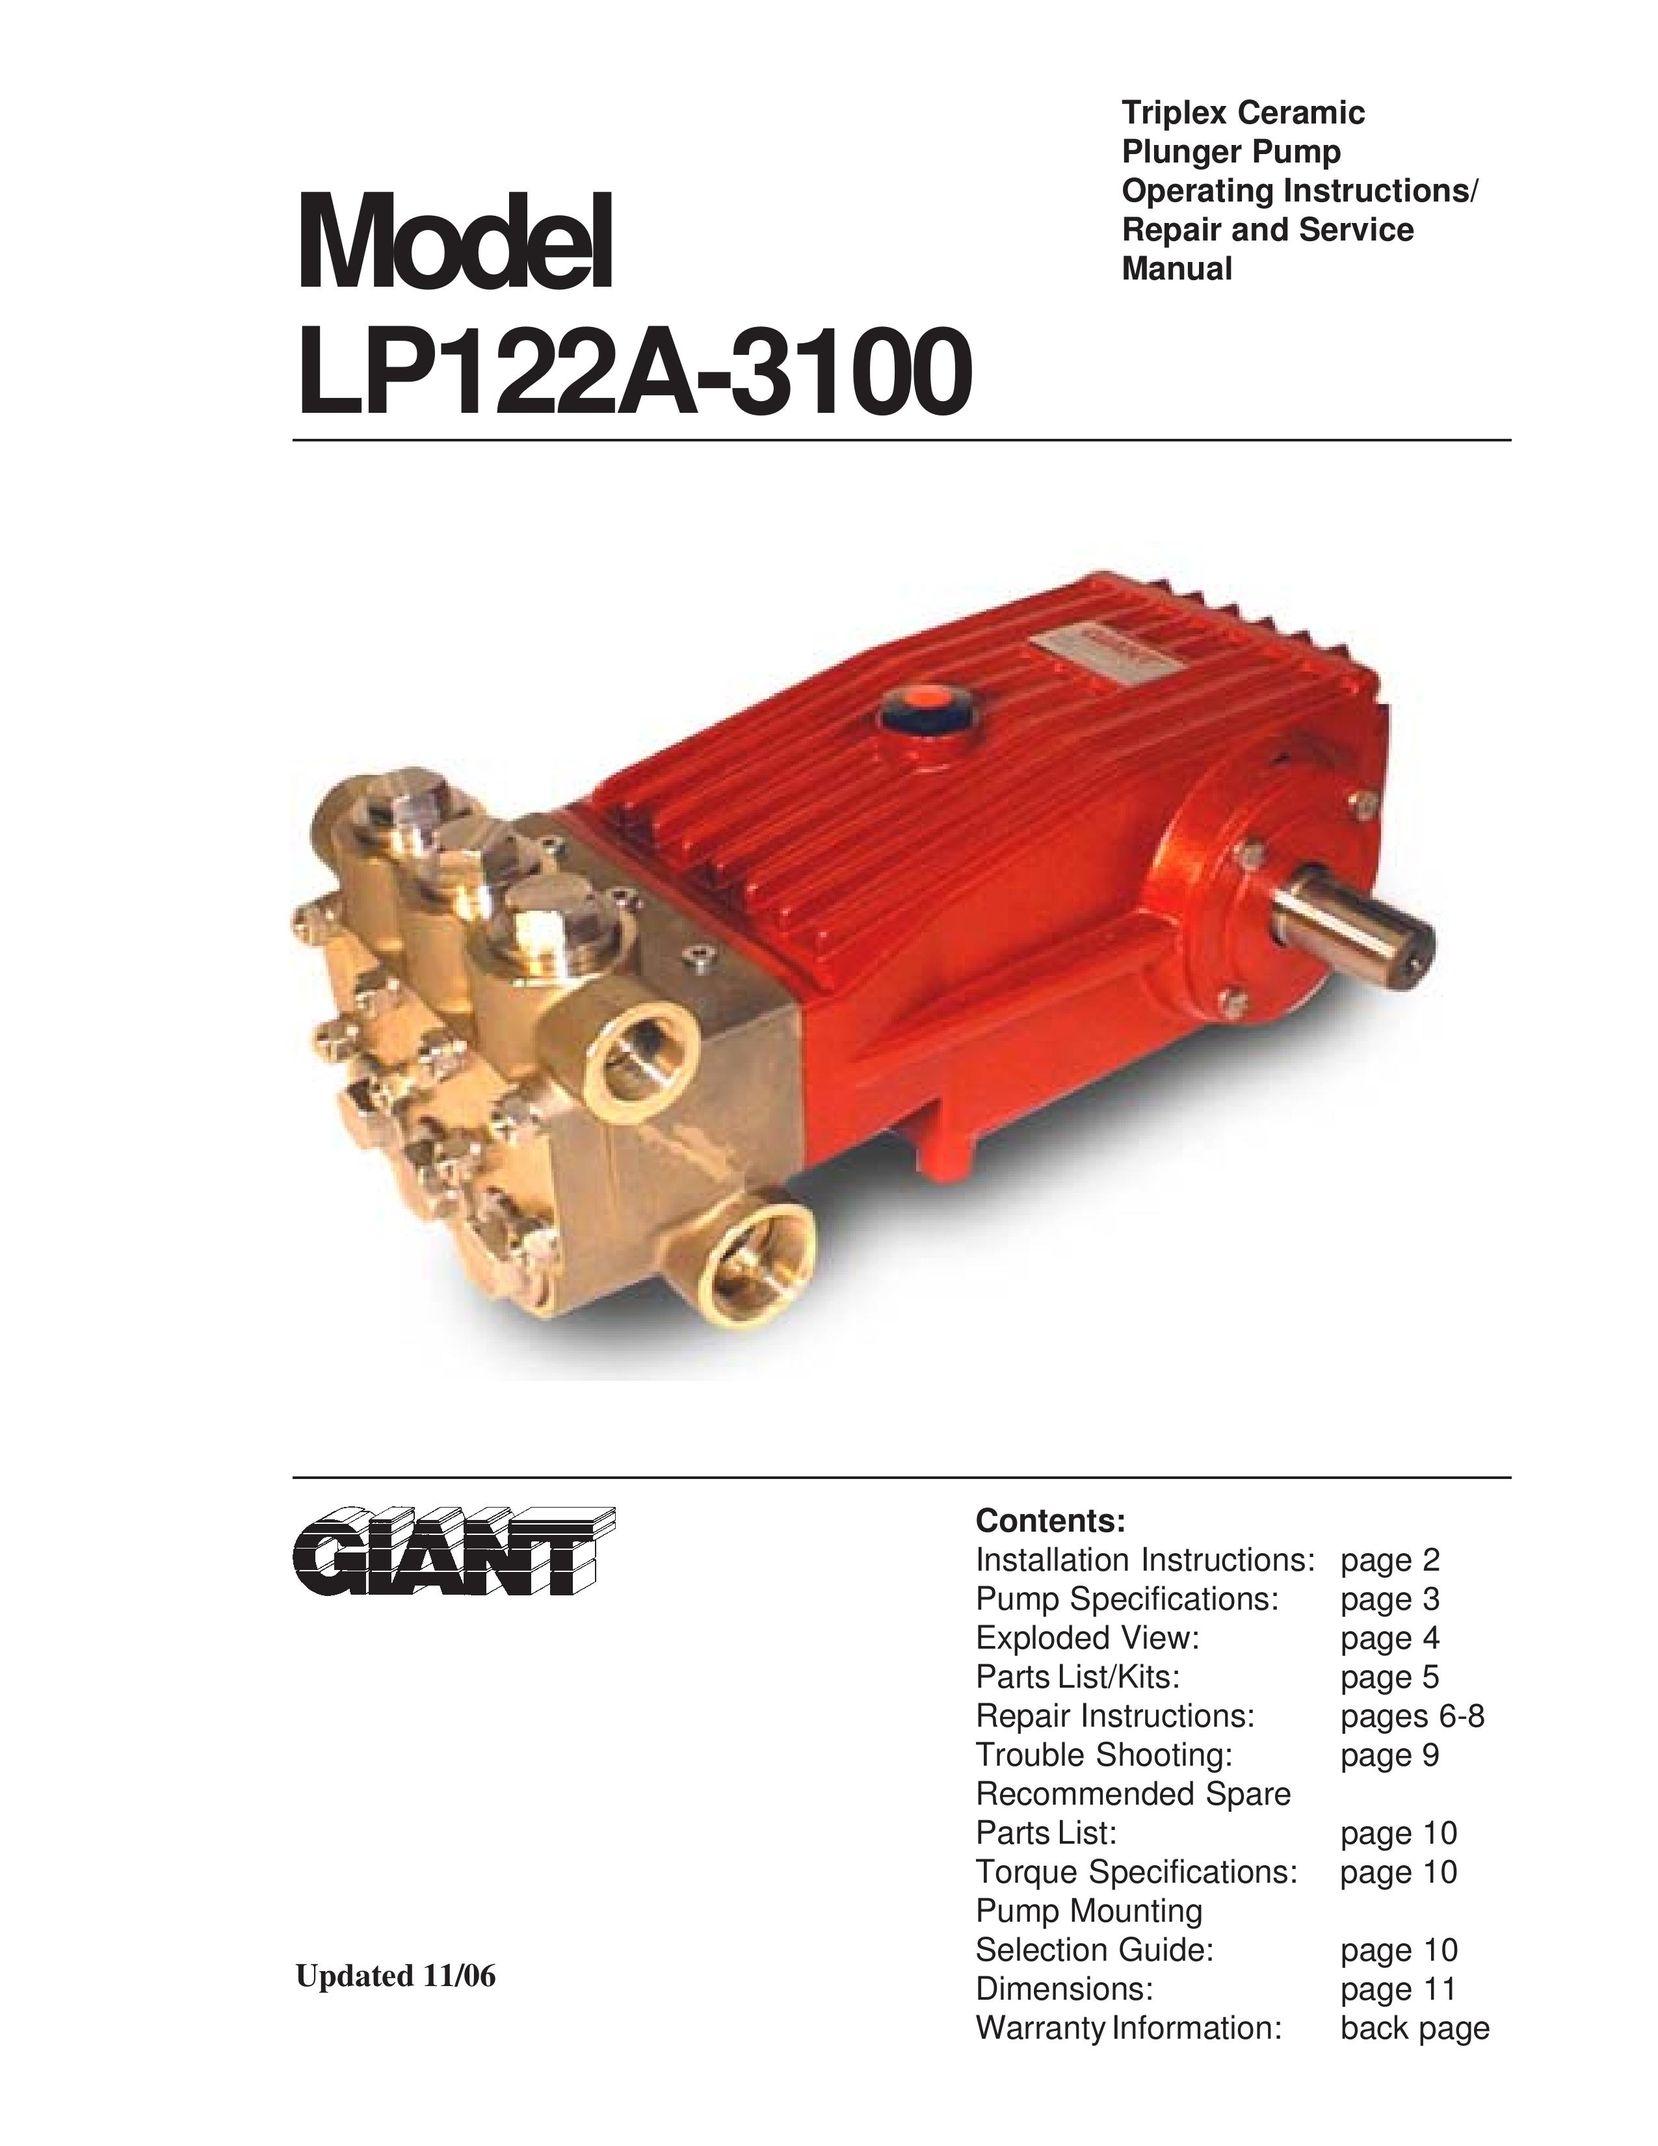 Giant LP122A-3100 Router User Manual